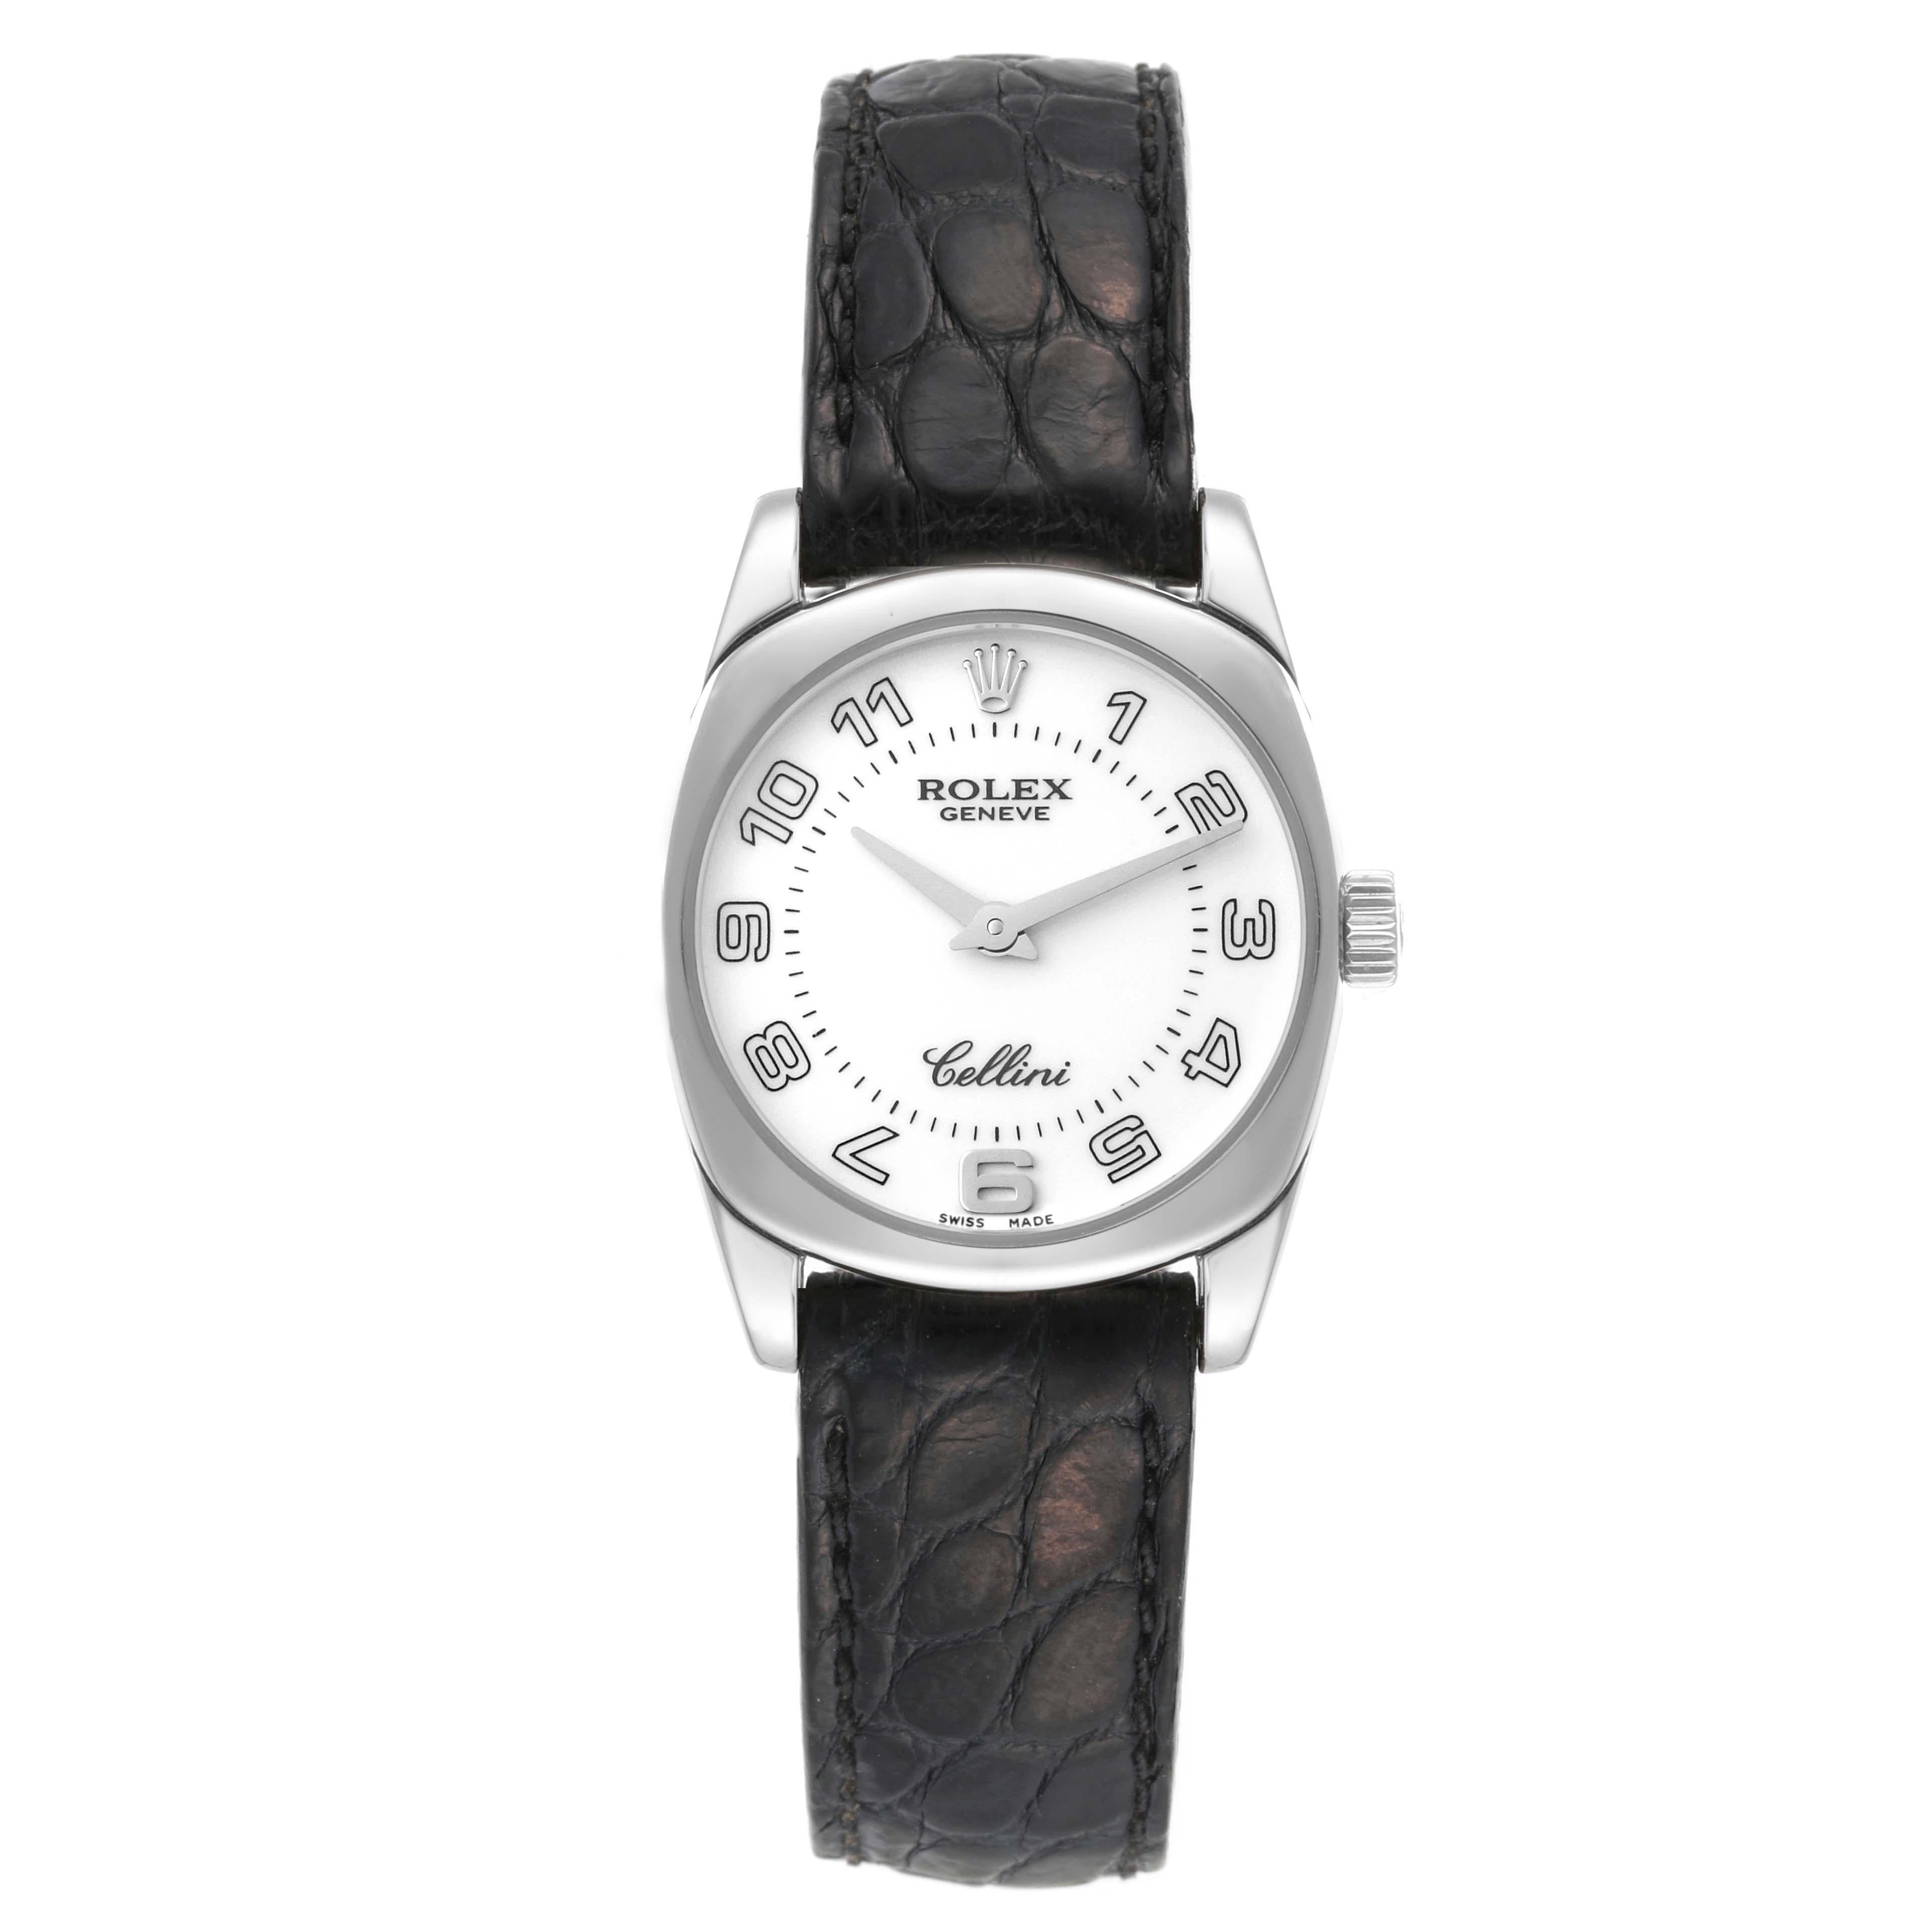 Rolex Cellini Danaos White Gold Black Strap Ladies Watch 6229. Quartz movement. 18k white gold rounded rectangular case 26.5 mm. Rolex logo on a crown. 18k white gold bezel. Scratch resistant sapphire crystal. White dial with Arabic numerals and